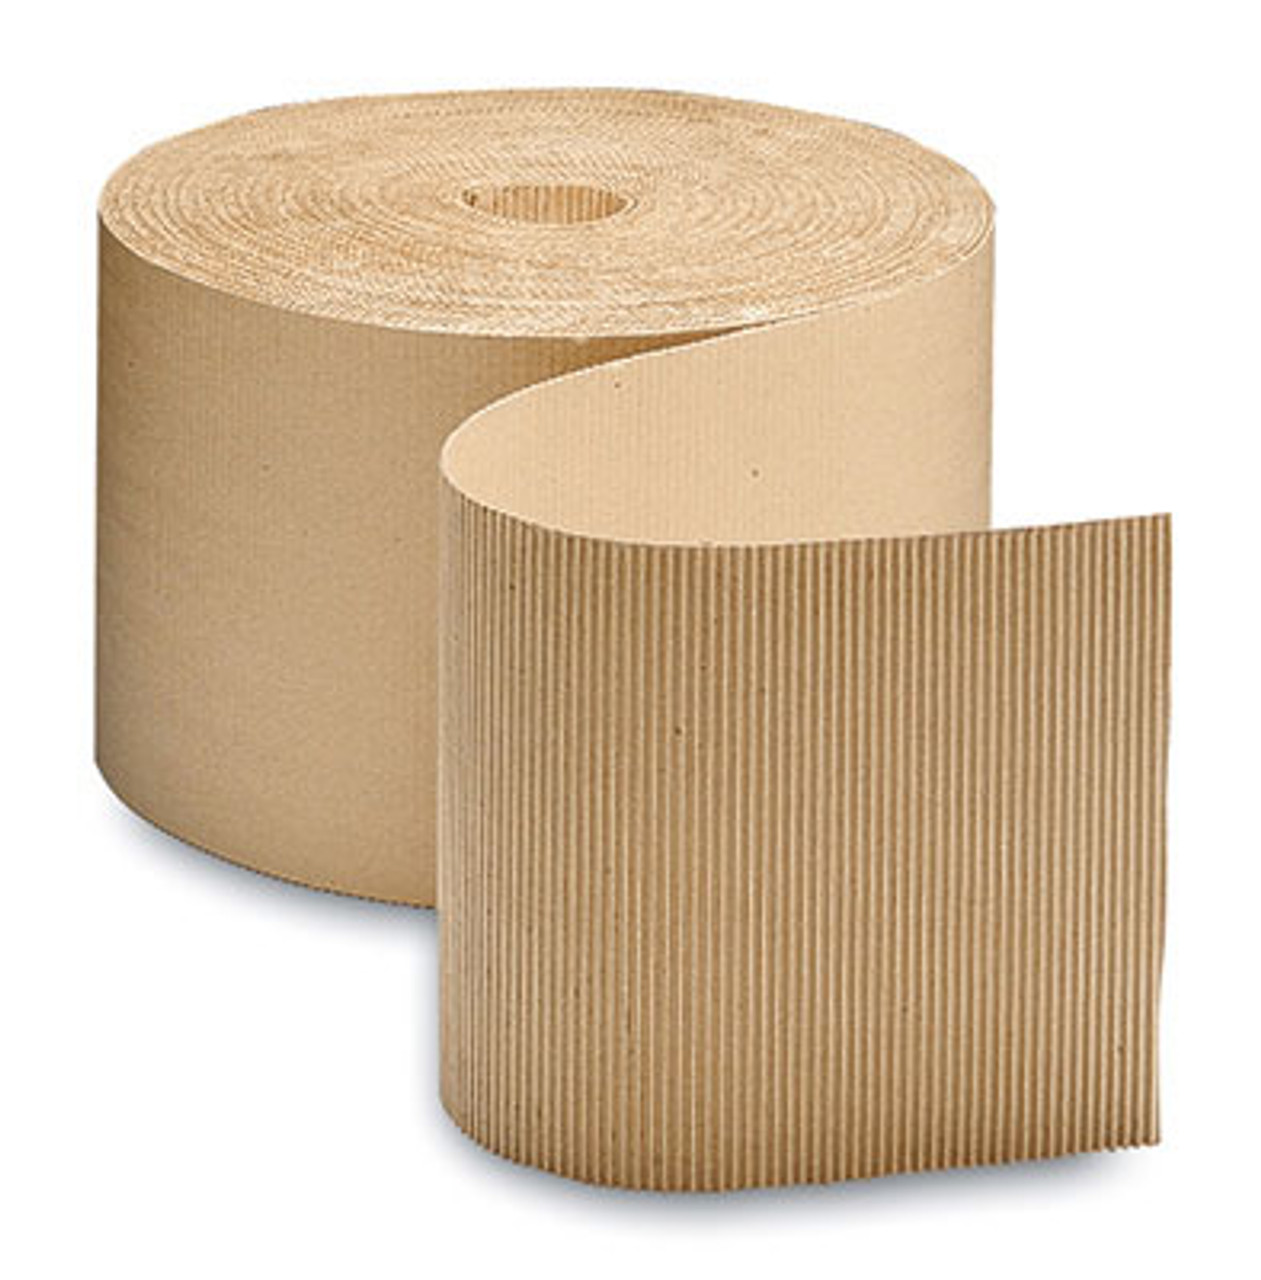 Single Face Corrugated Wrap on a Roll (Qty) 1 Roll